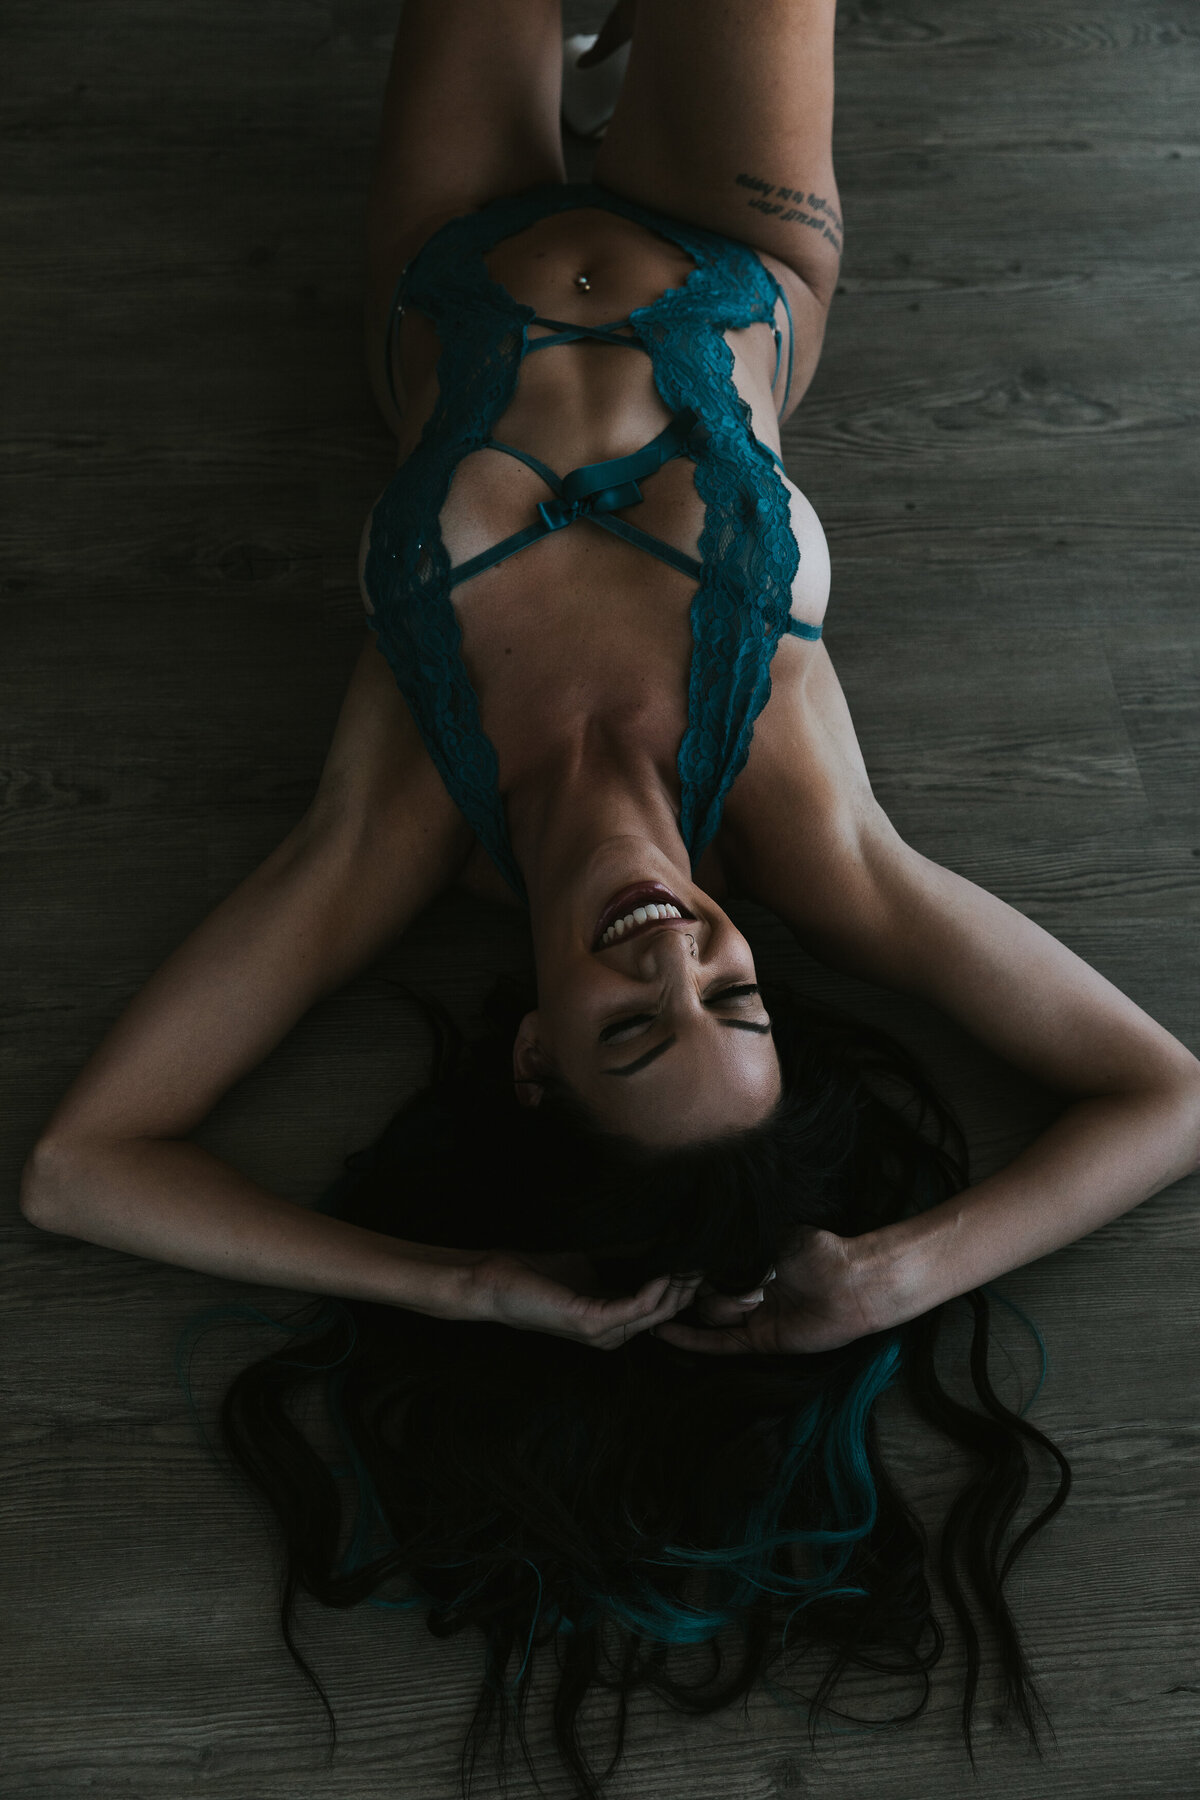 woman laying on the floor with her hands in her hair and she is wearing lingerie